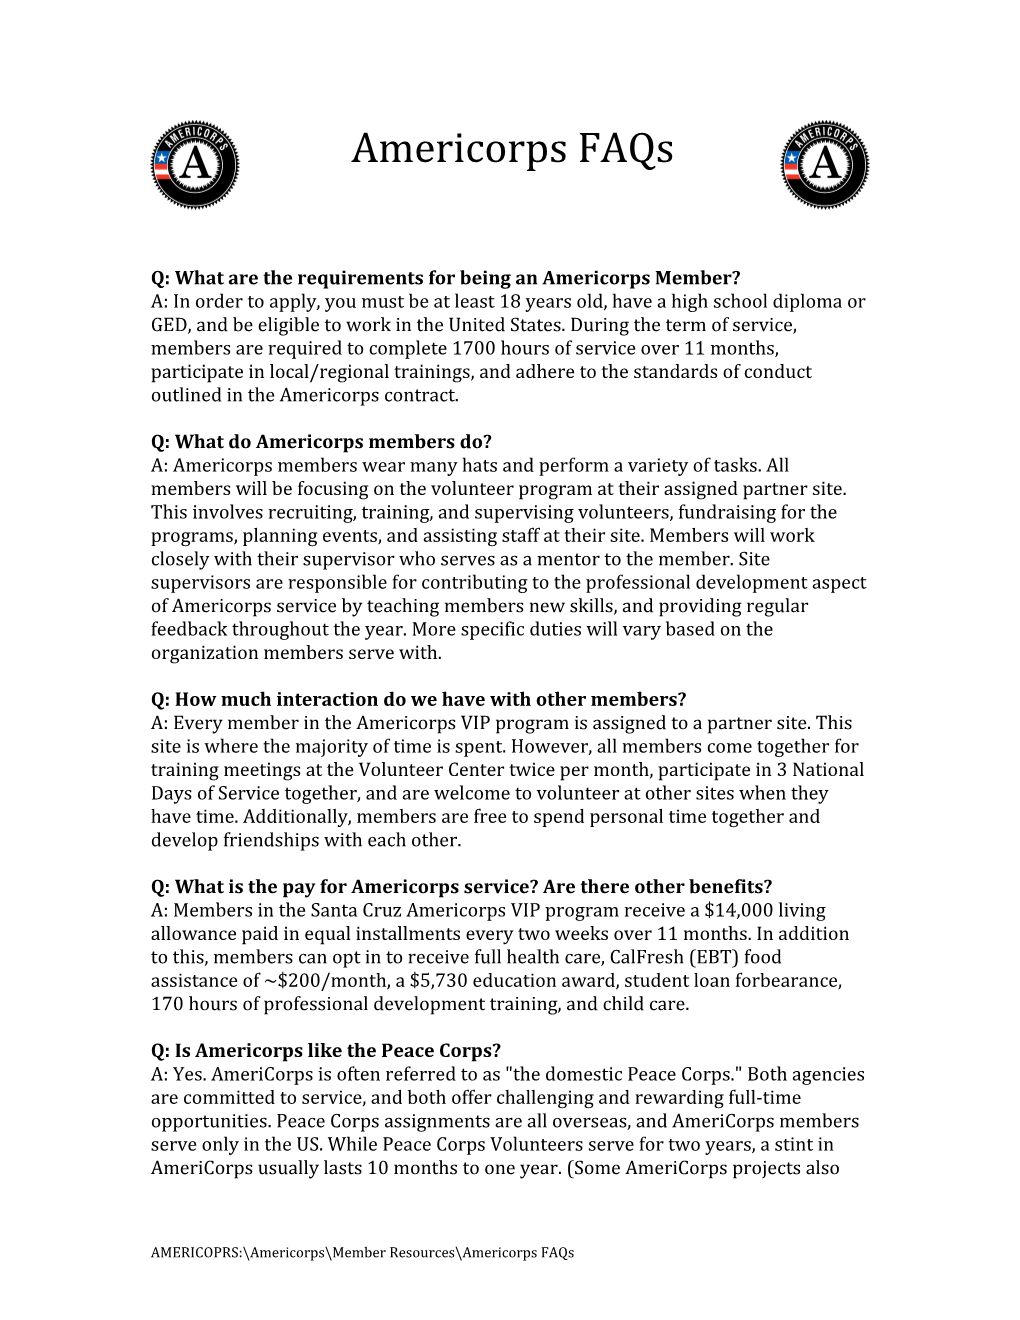 Q: What Are the Requirements for Being an Americorps Member?